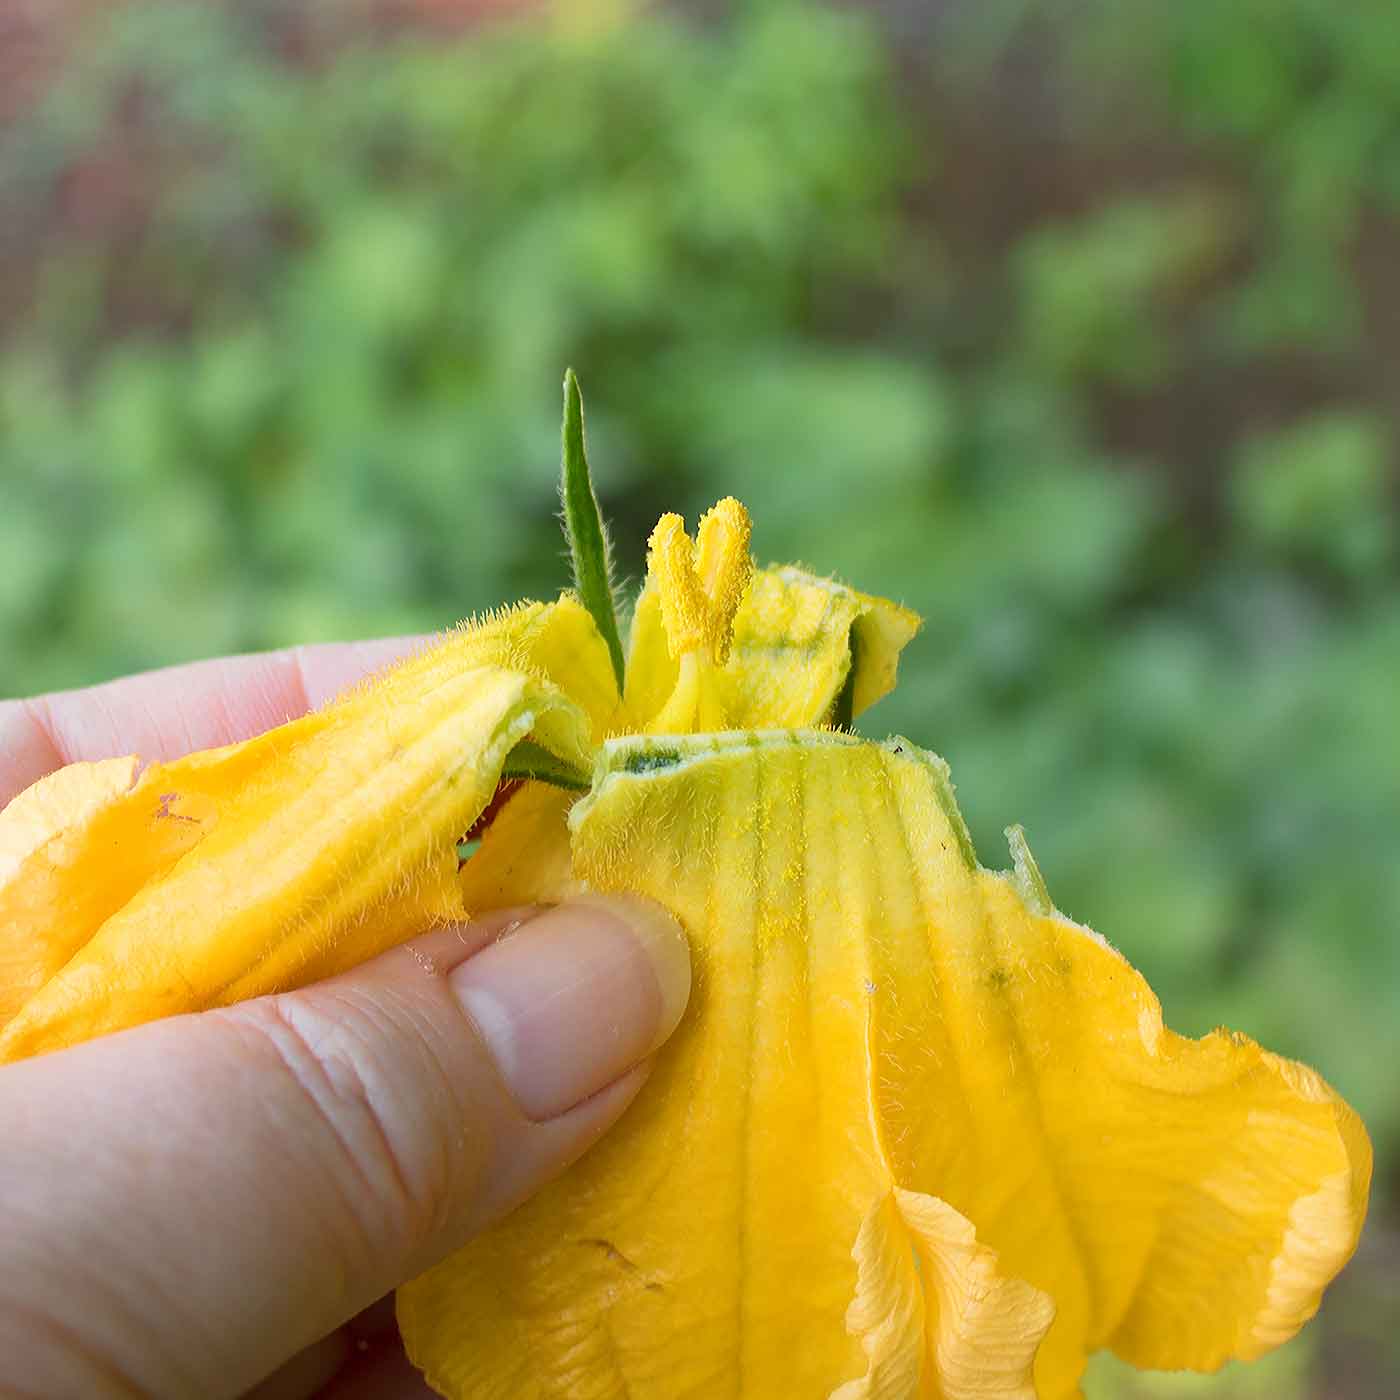 Pollen-covered anther of a male butternut squash blossom